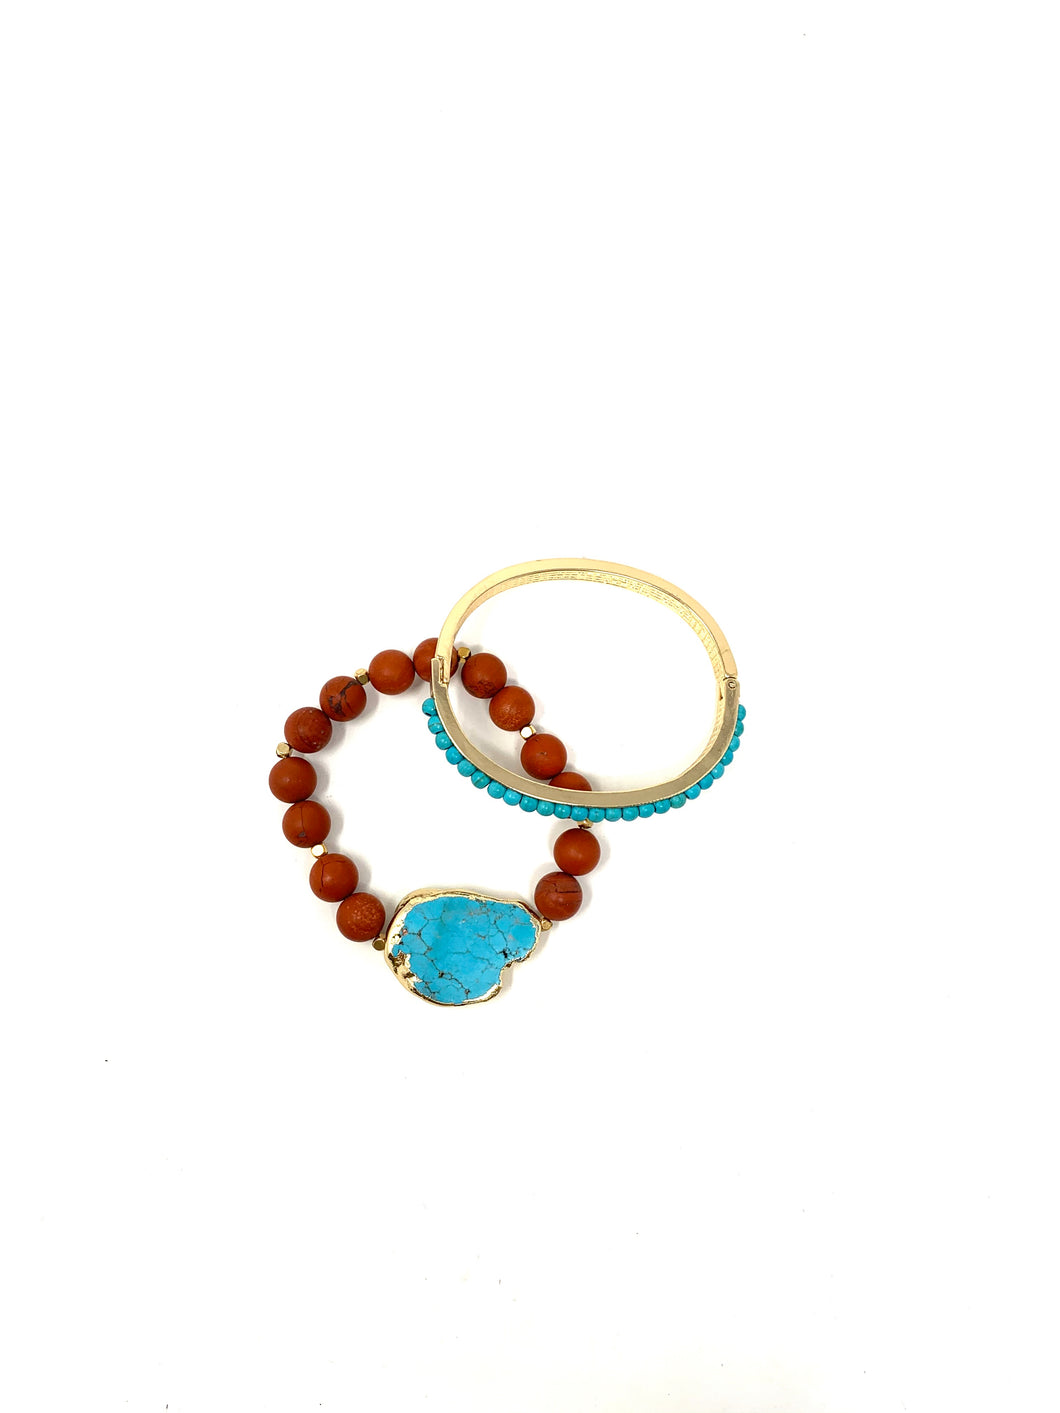 Native Clay Beads and Turquoise Bracelet Set